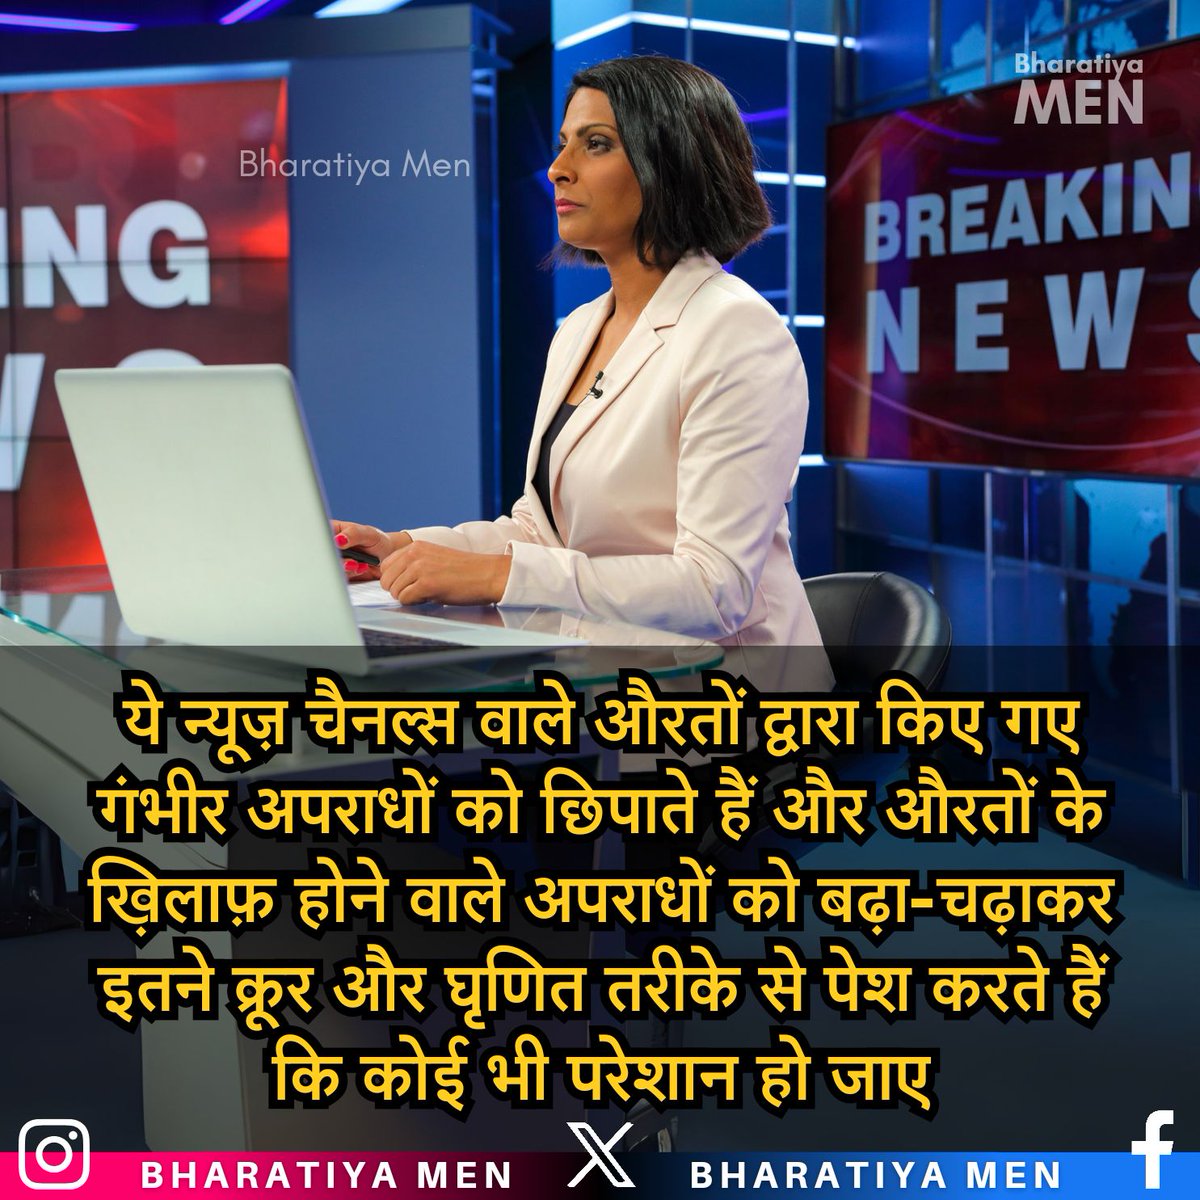 These #news channels hide serious #crimes committed by #women and exaggerate the #CrimesAgainstWomen and present them in such a cruel and disgusting manner that anyone gets disturbed.